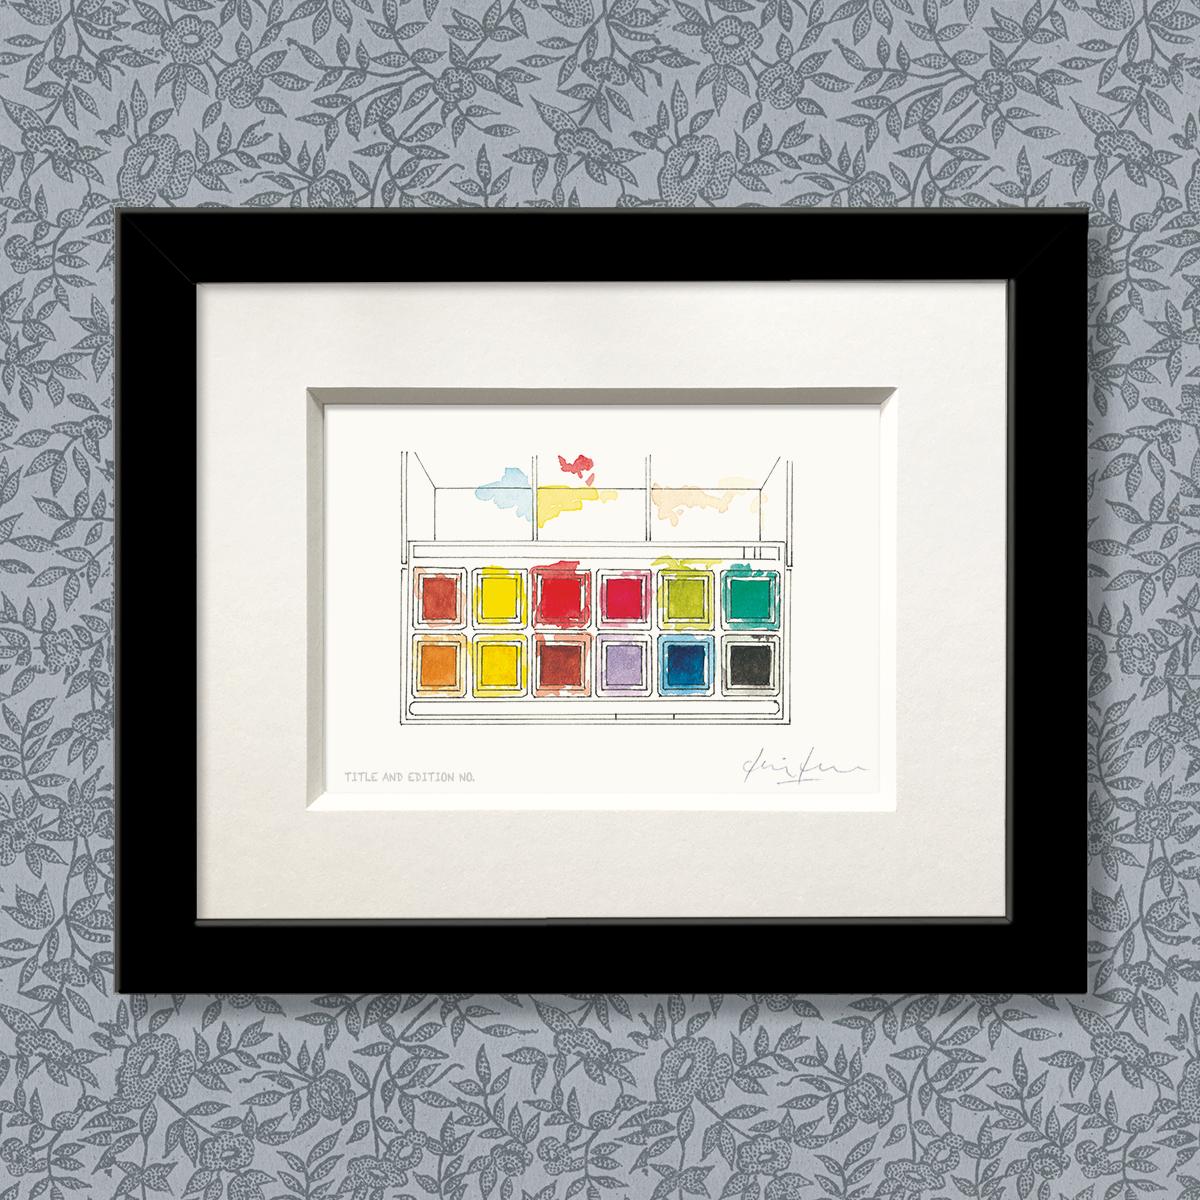 Limited edition print from pen, ink and watercolour sketch of a paint box in a black frame